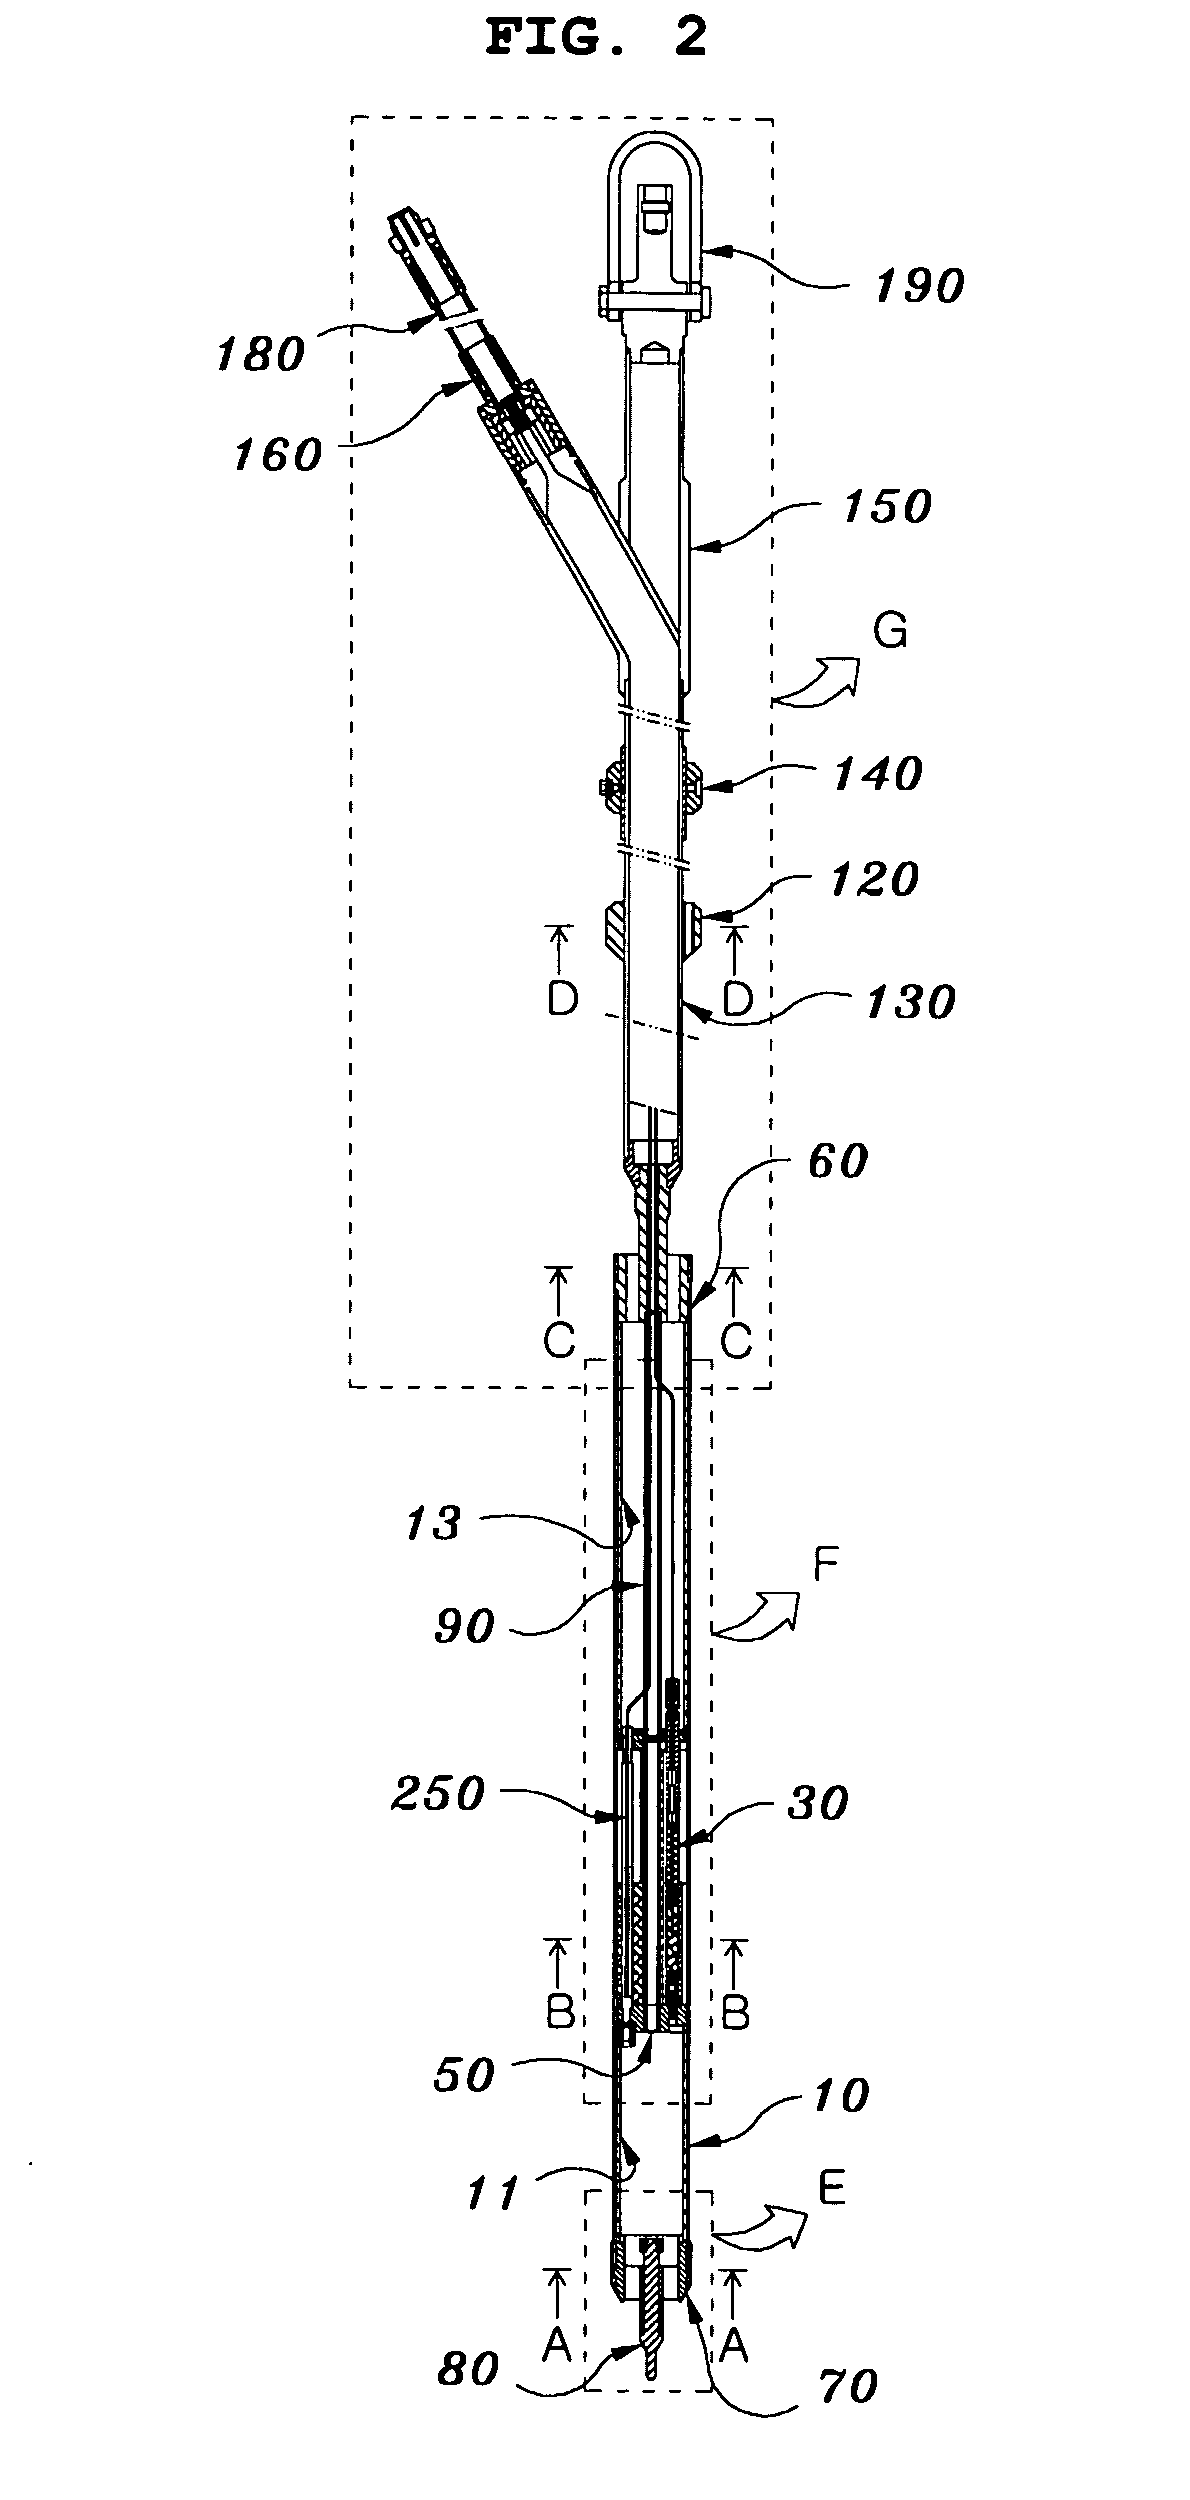 Instrumented capsule for nuclear fuel irradiation tests in research reactors